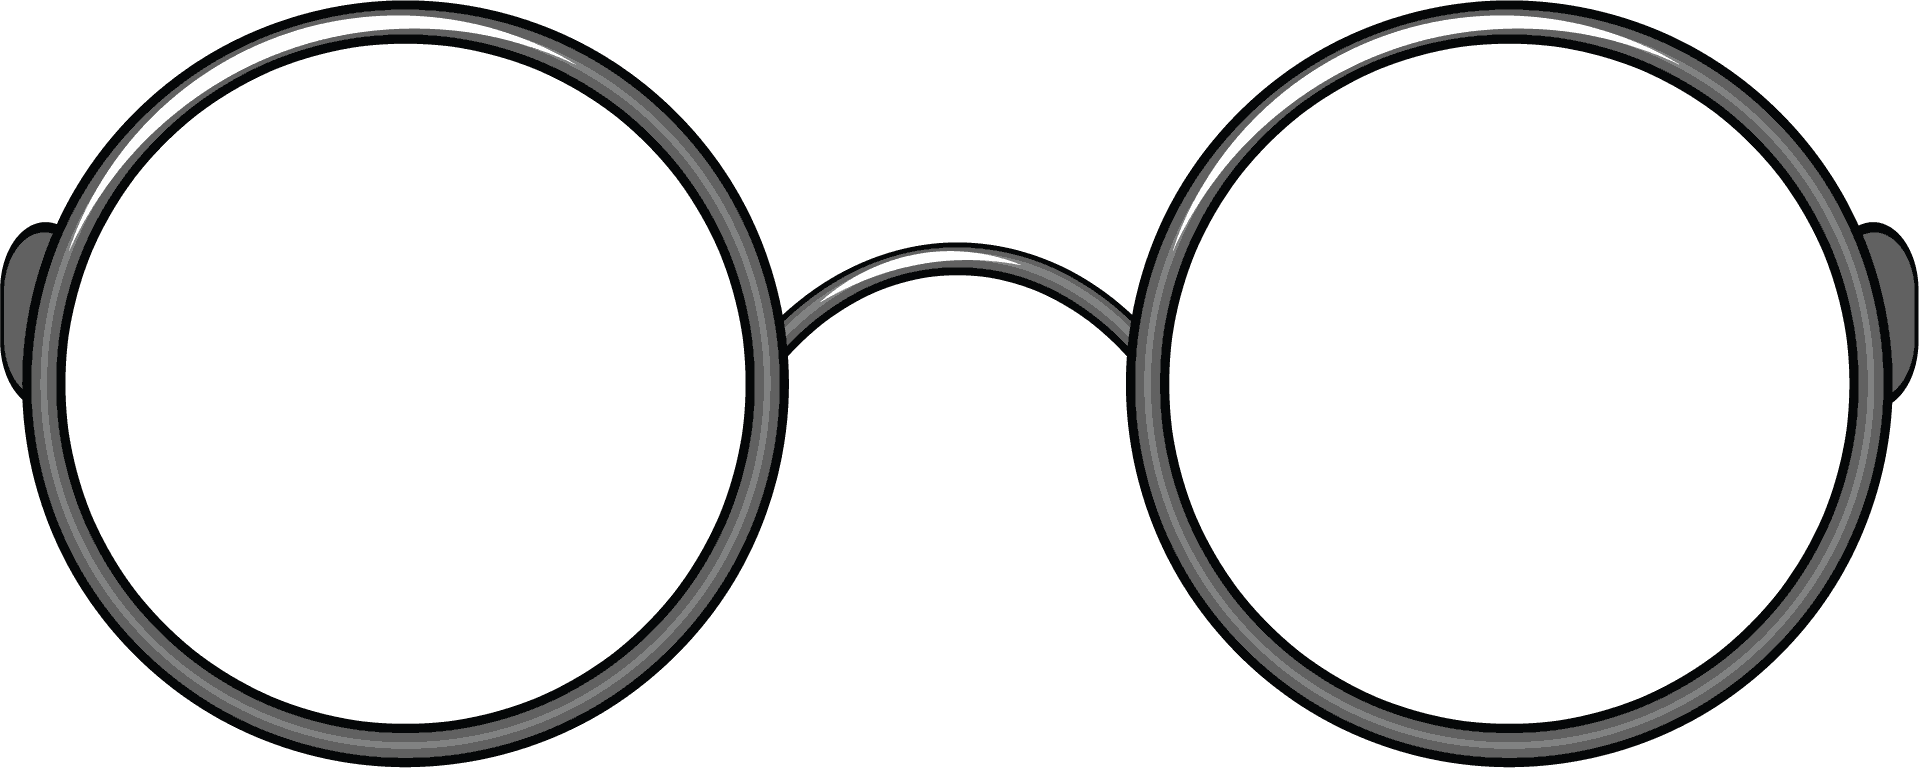 Goggles clipart round.  collection of glasses